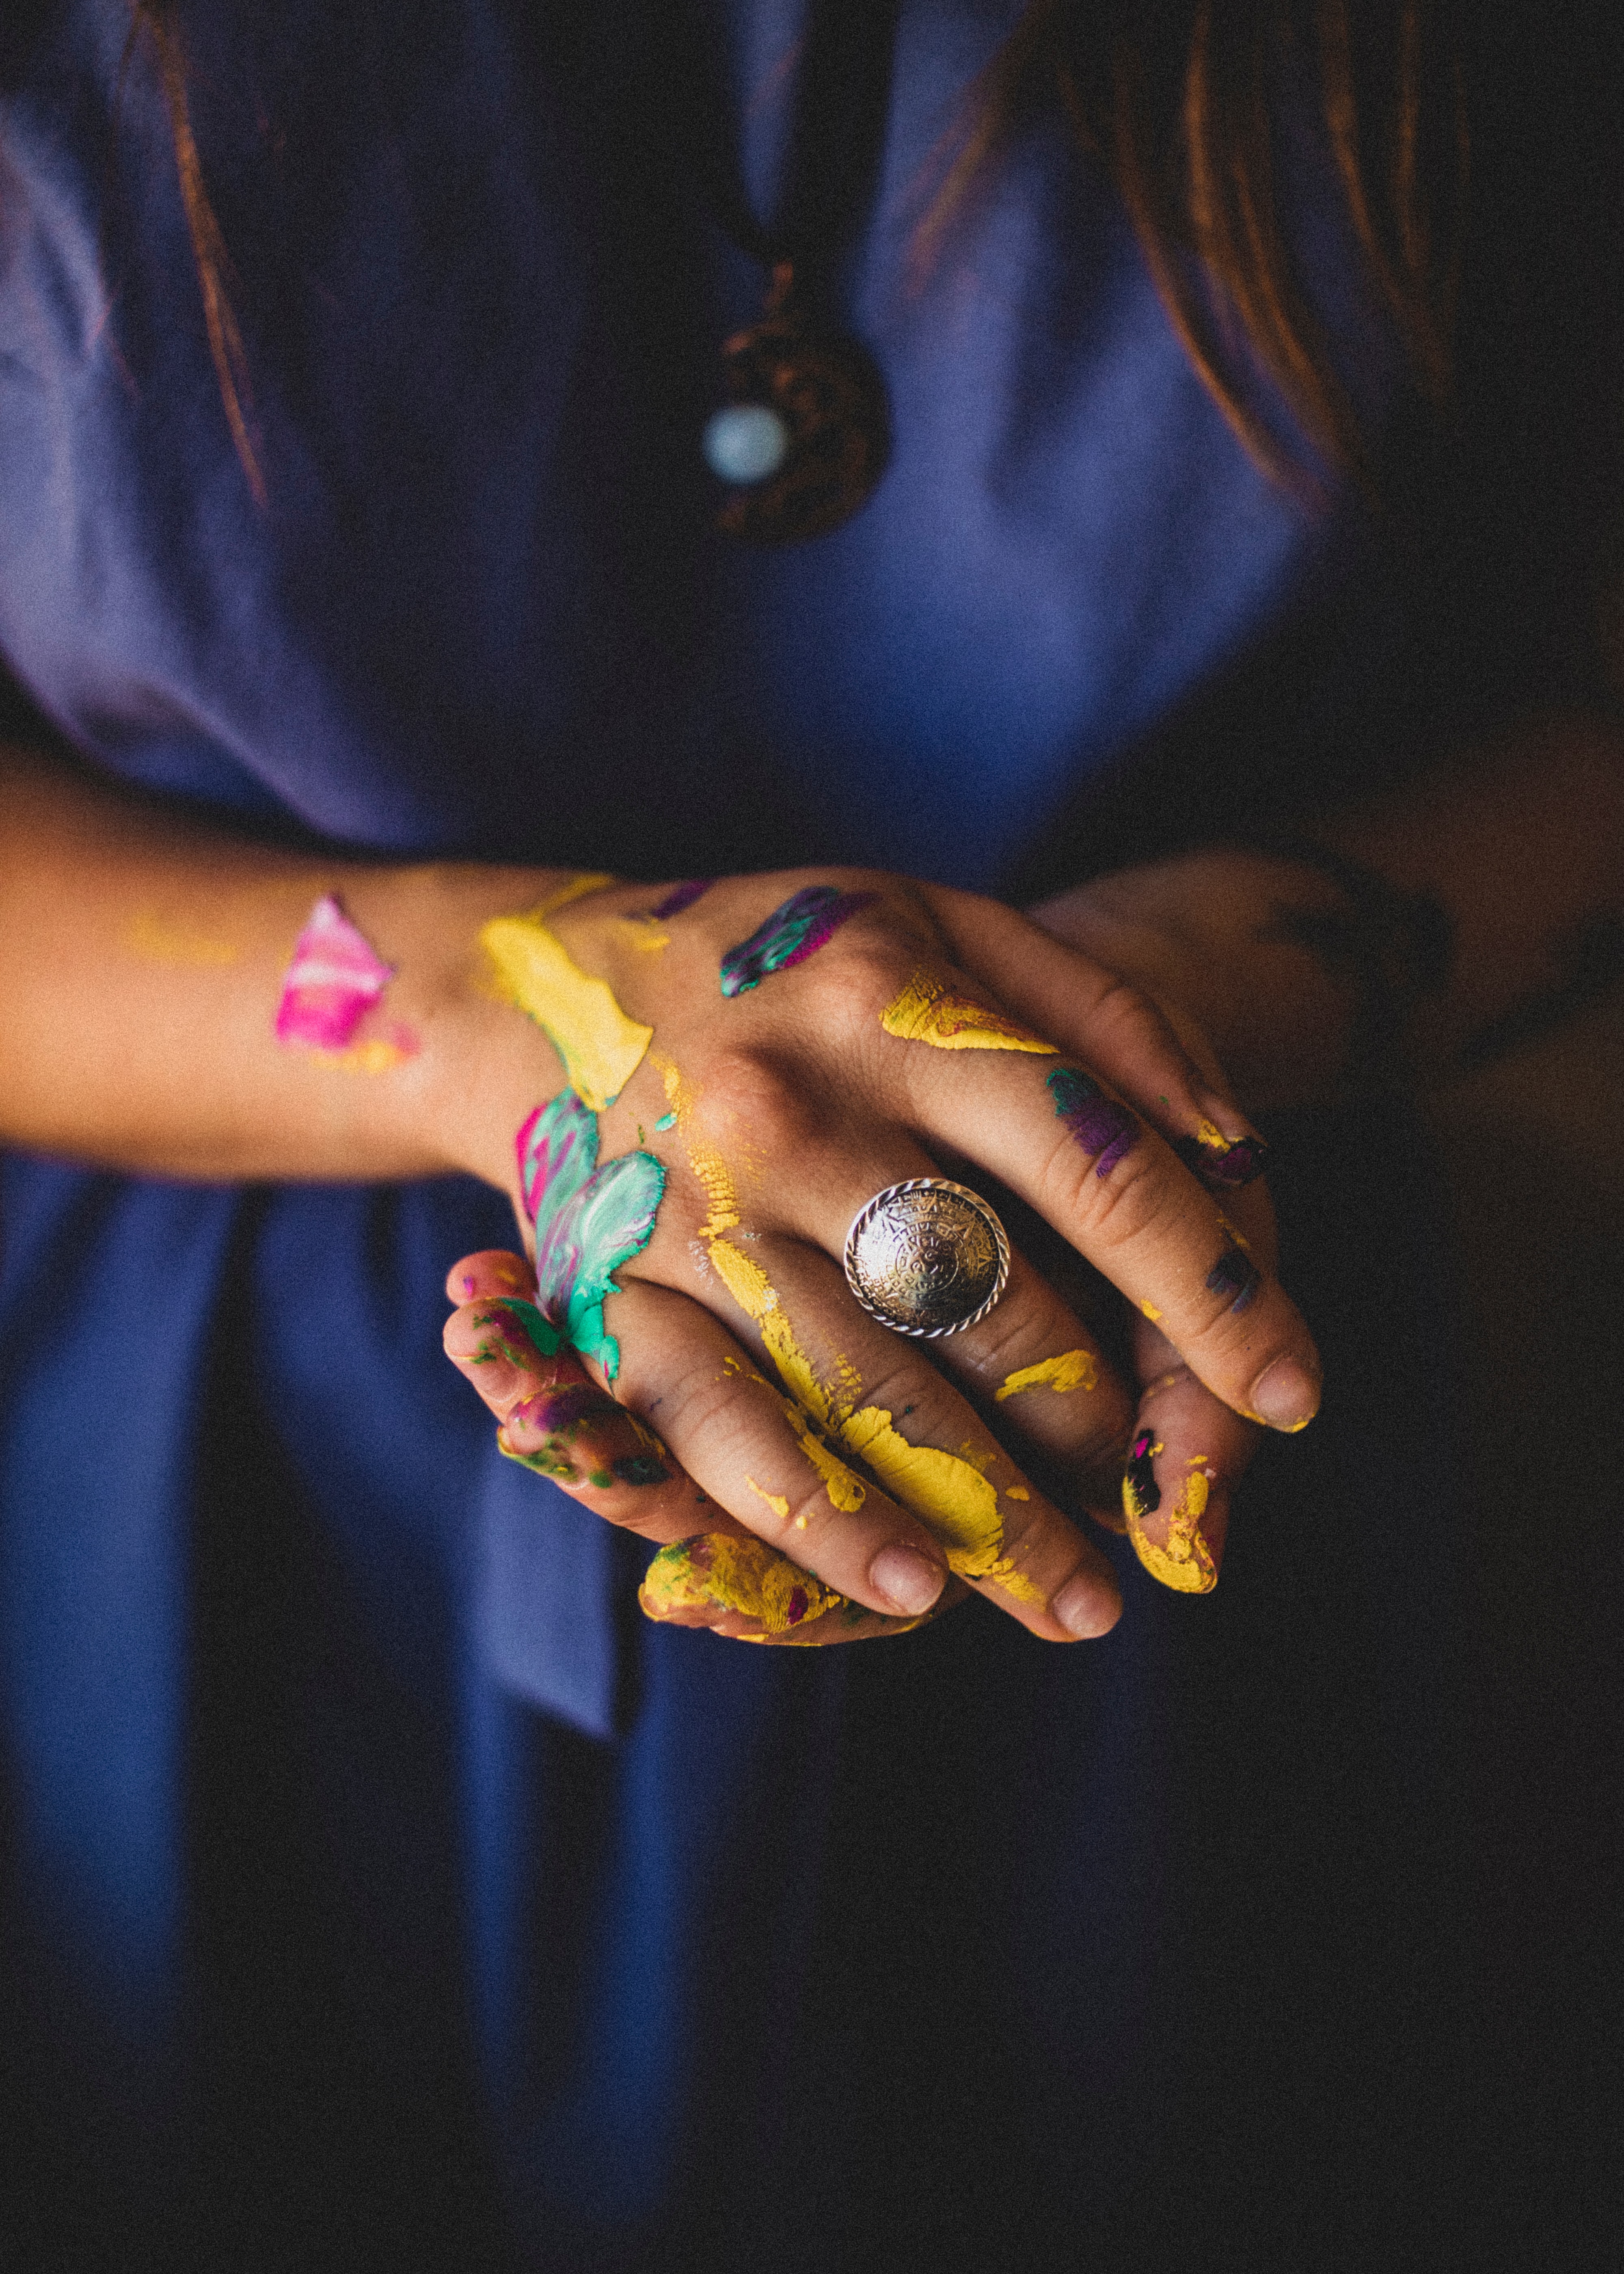 paint, ring, girl, miscellanea, miscellaneous, multicolored, motley, hands